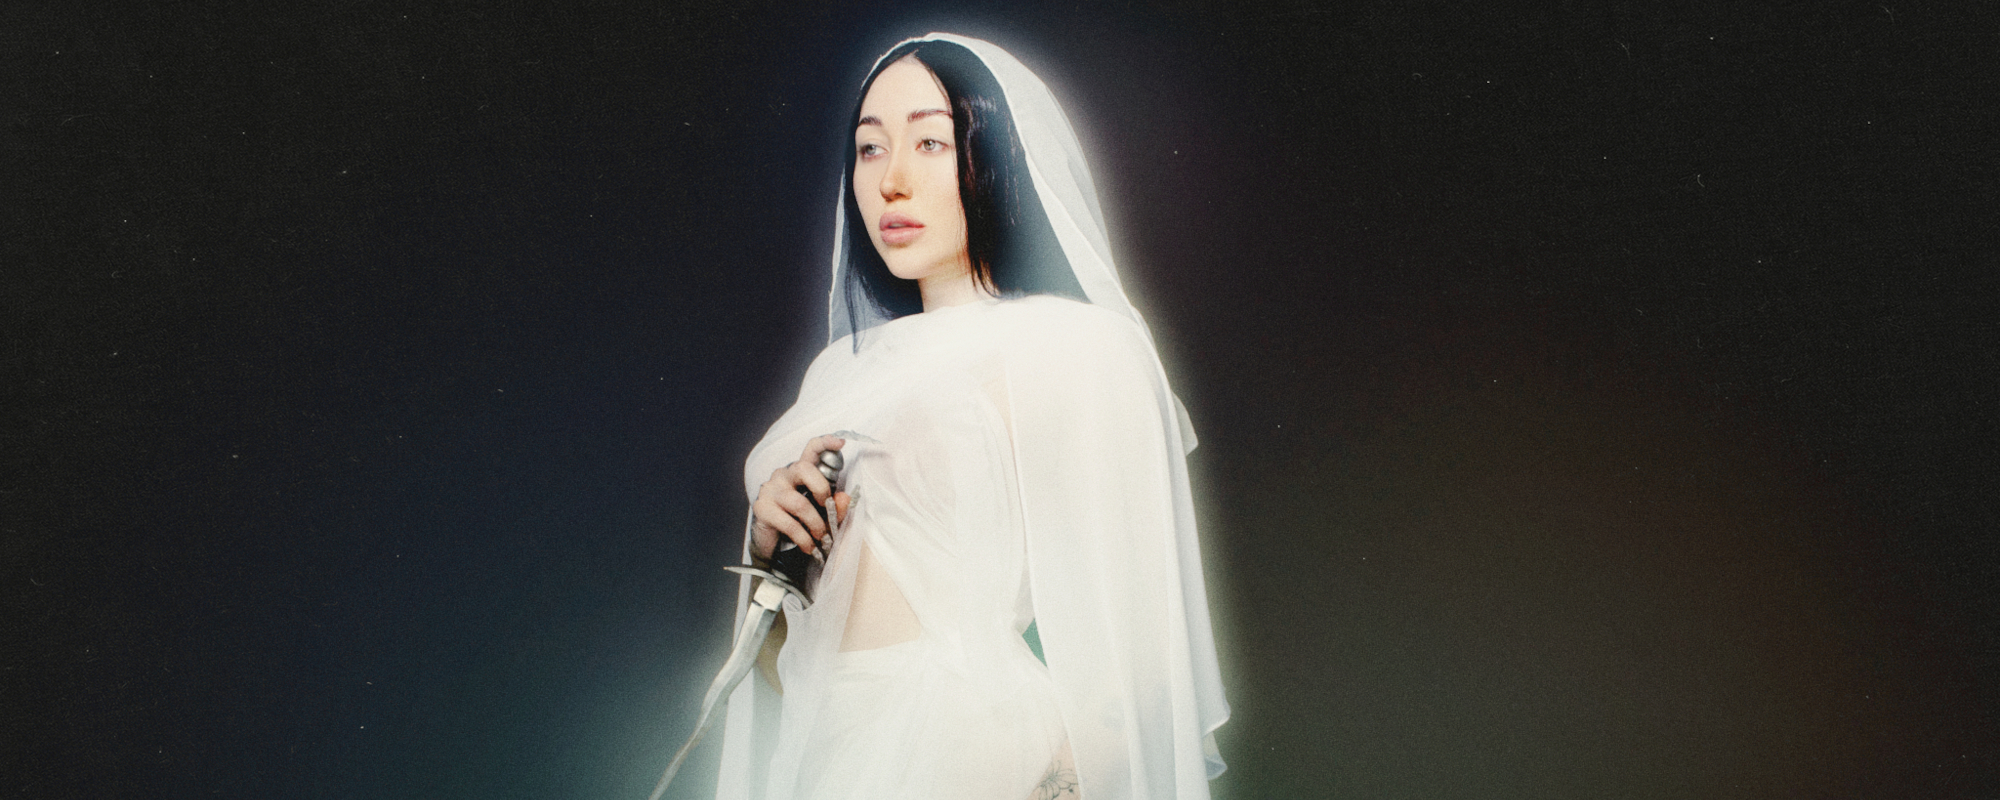 Noah Cyrus Releases Striking New Single and Video, “I Burned LA Down,” Ahead of Debut Album